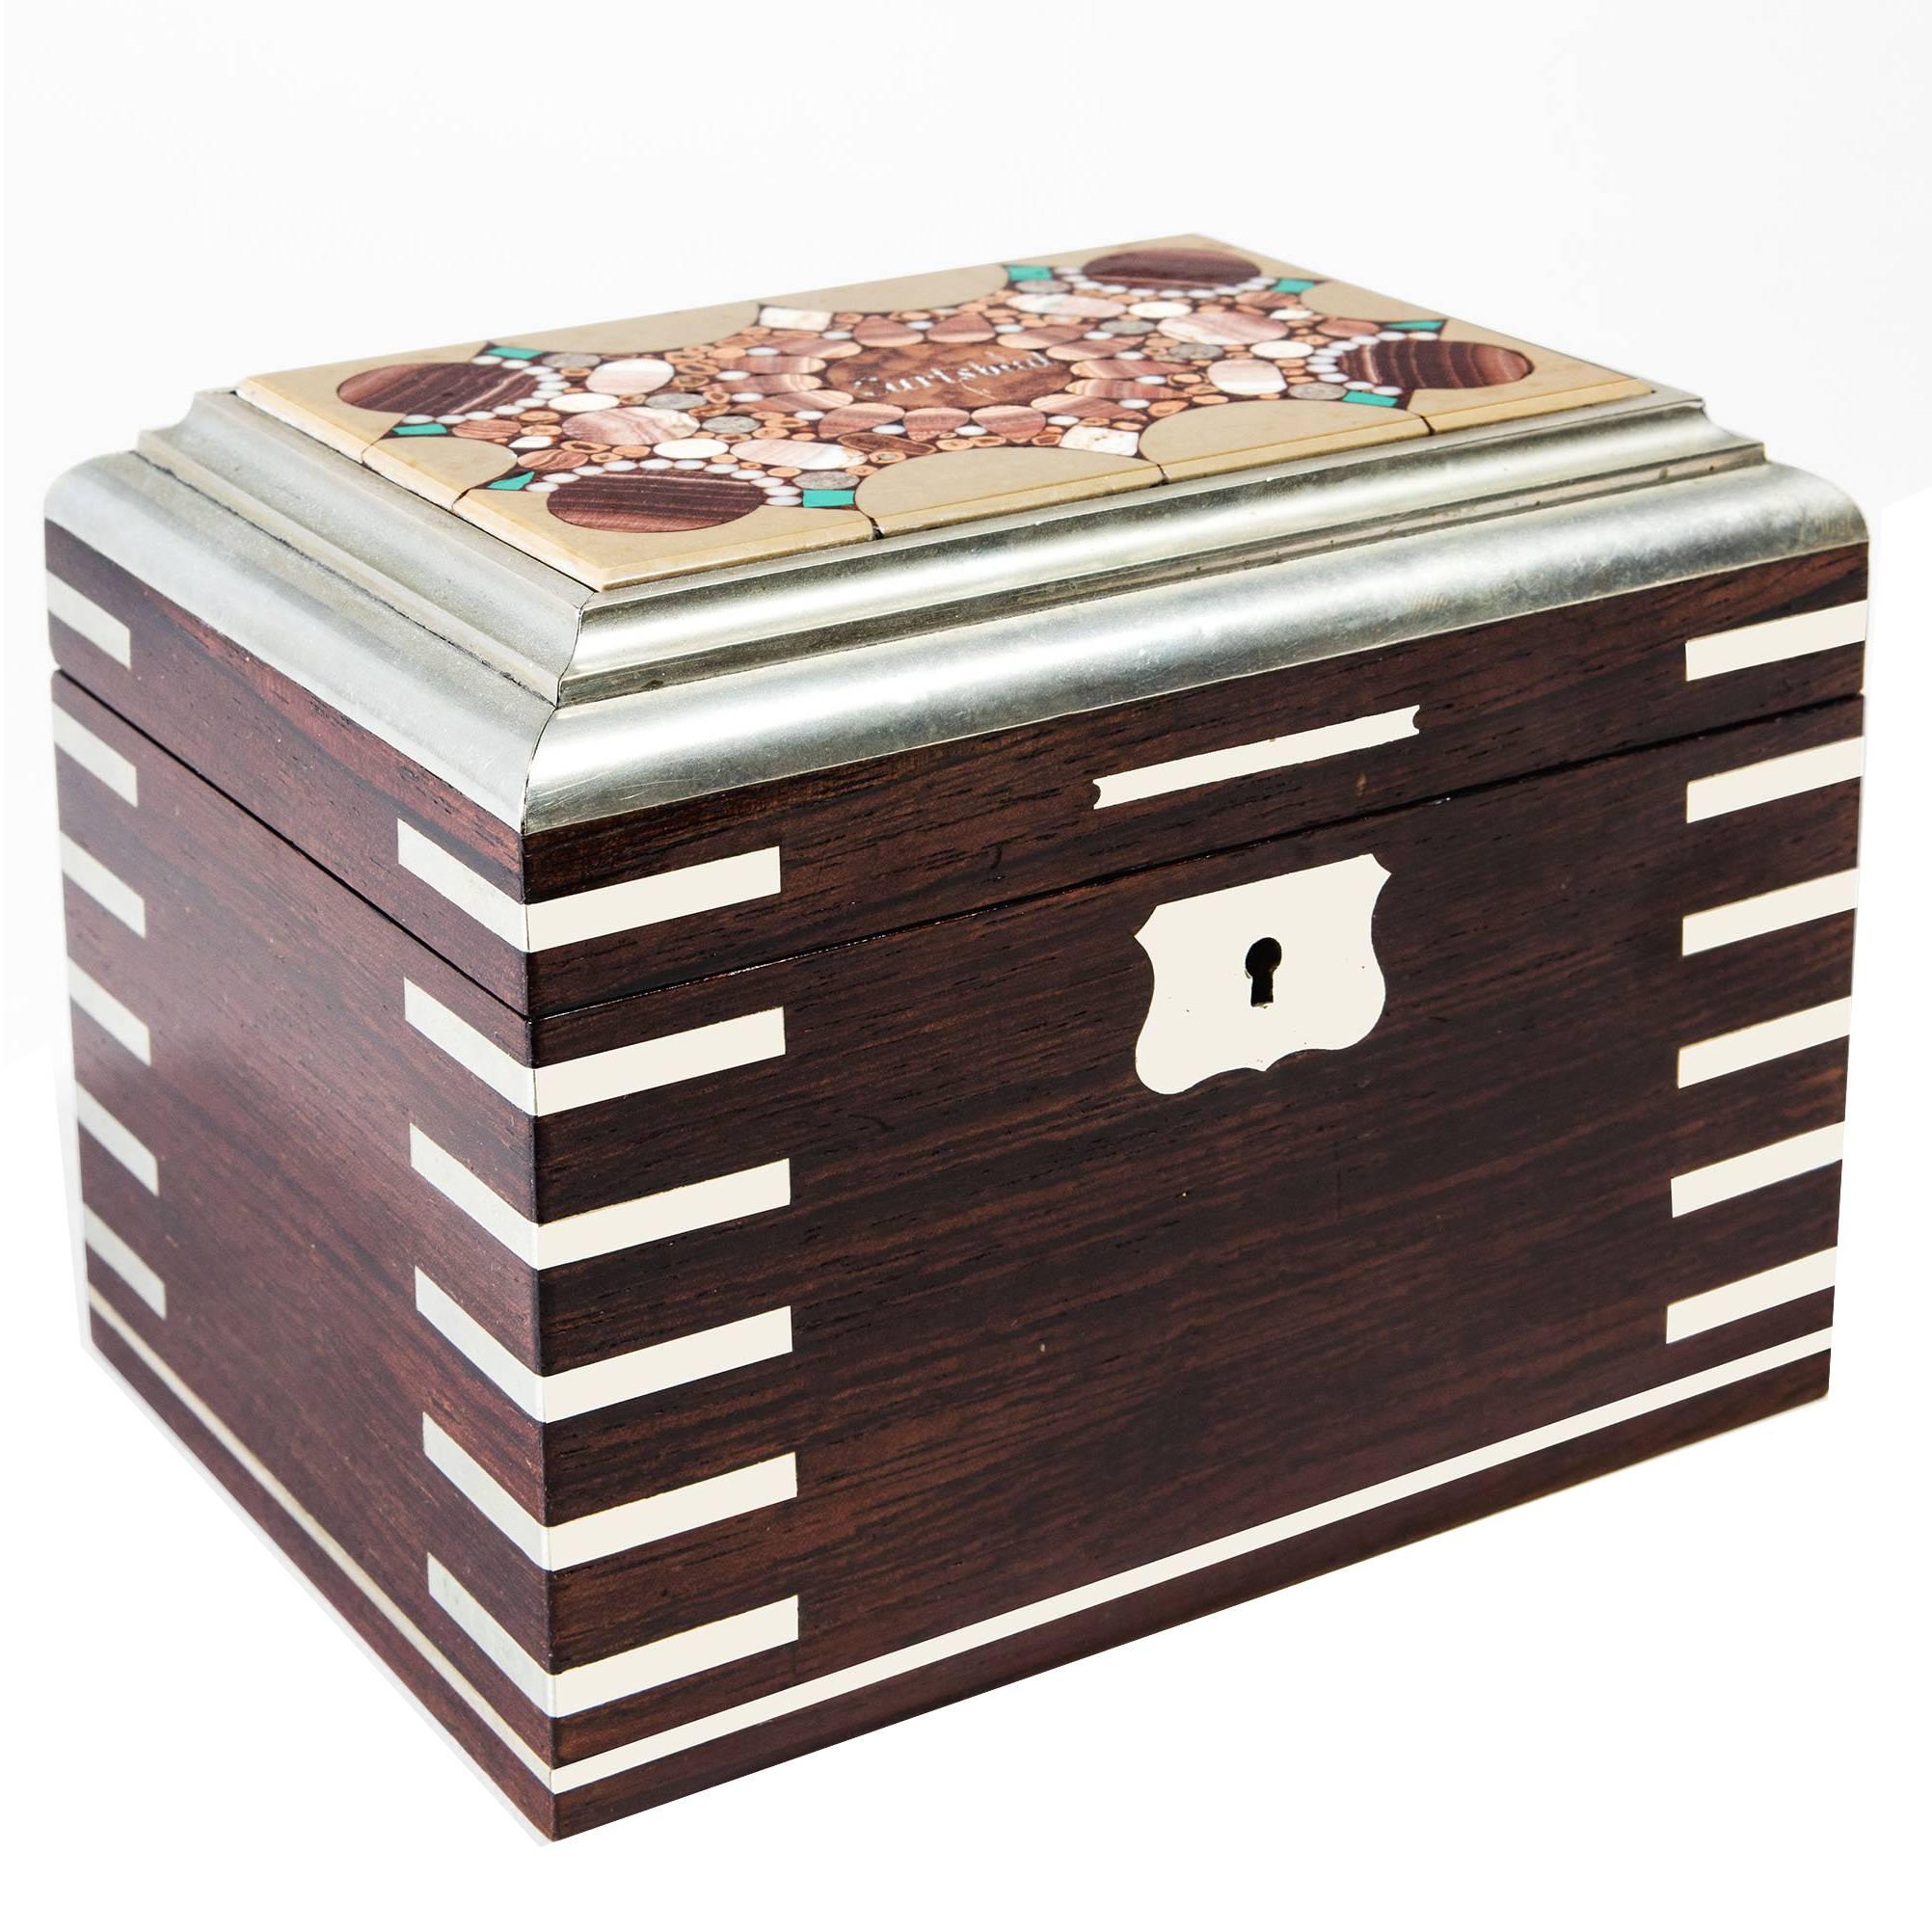 Carlsbad Bohemian Hardstone Inlaid Rosewood and White Metal Casket Box For Sale